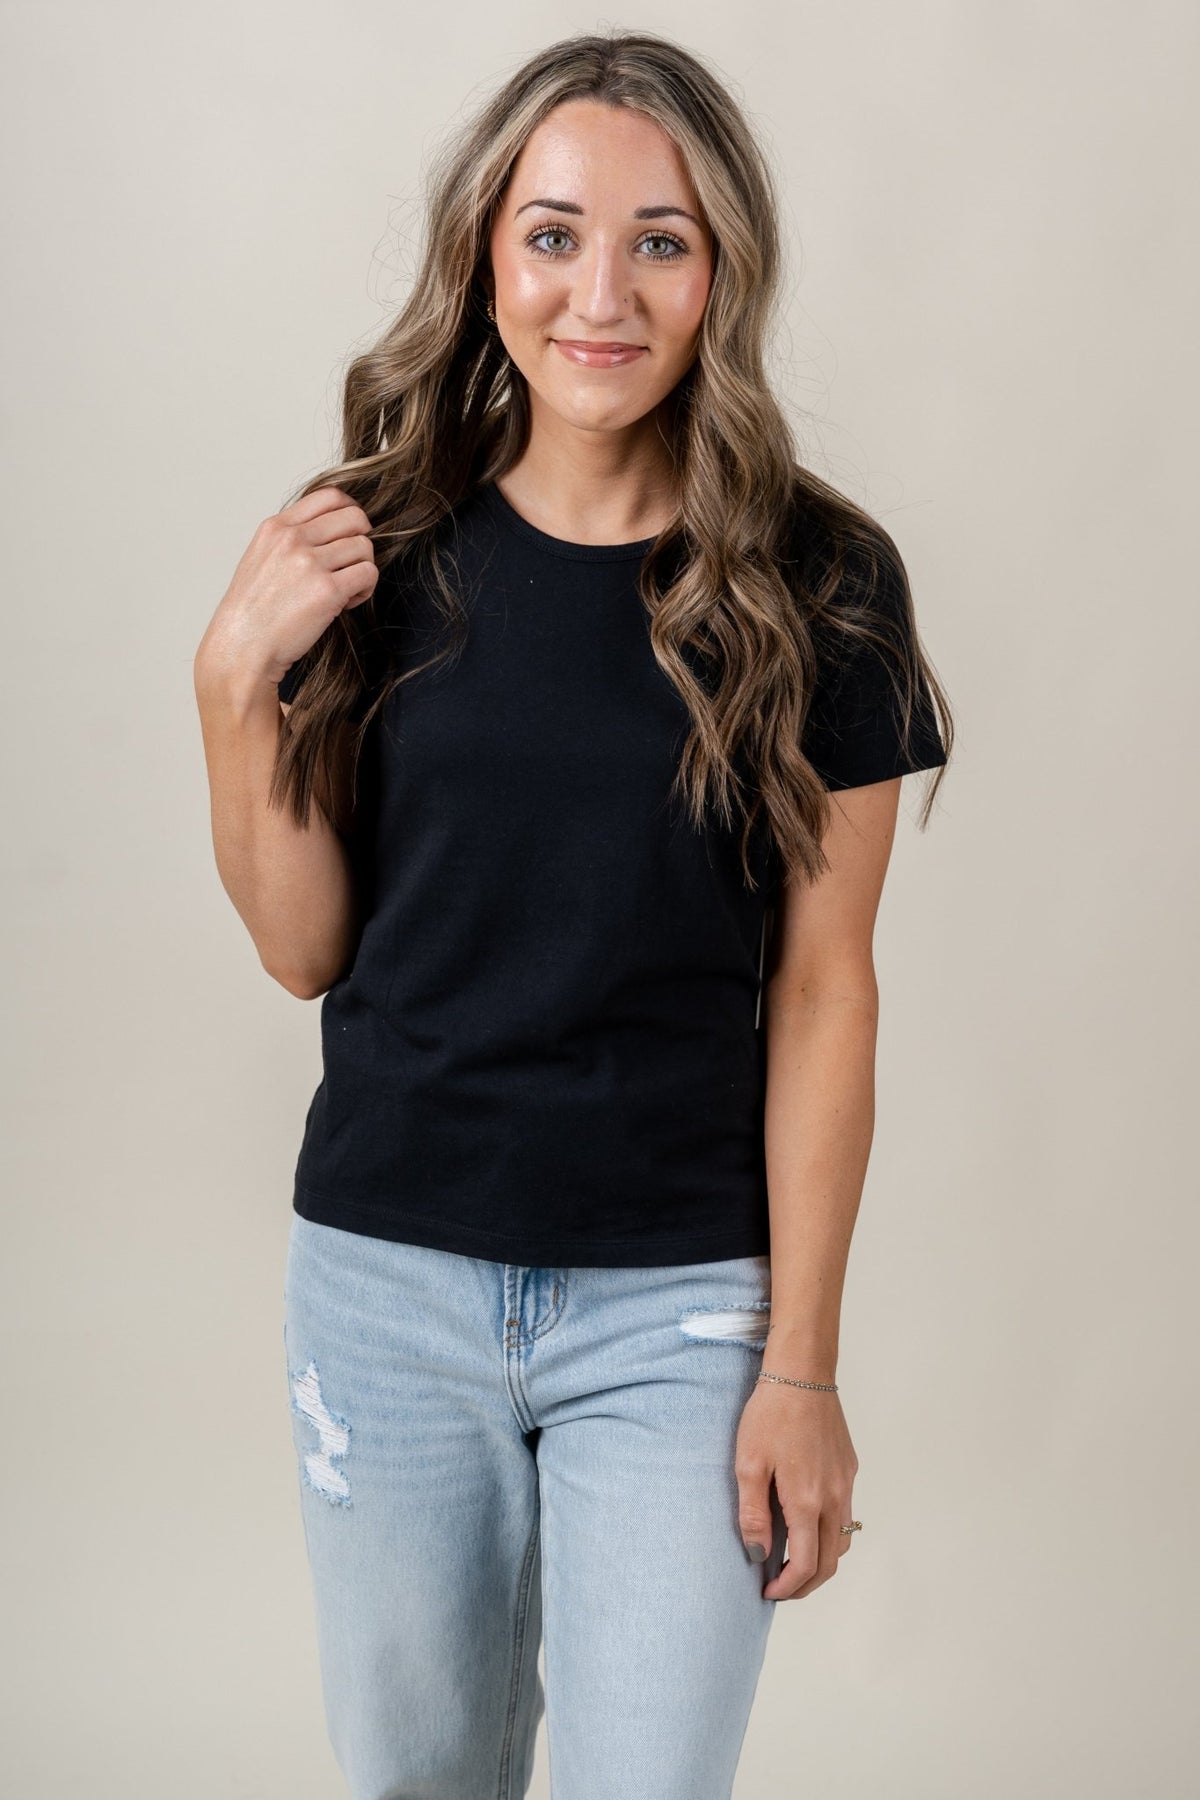 Z Supply classic short sleeve tee black - Z Supply Top - Z Supply Tops, Dresses, Tanks, Tees, Cardigans, Joggers and Loungewear at Lush Fashion Lounge